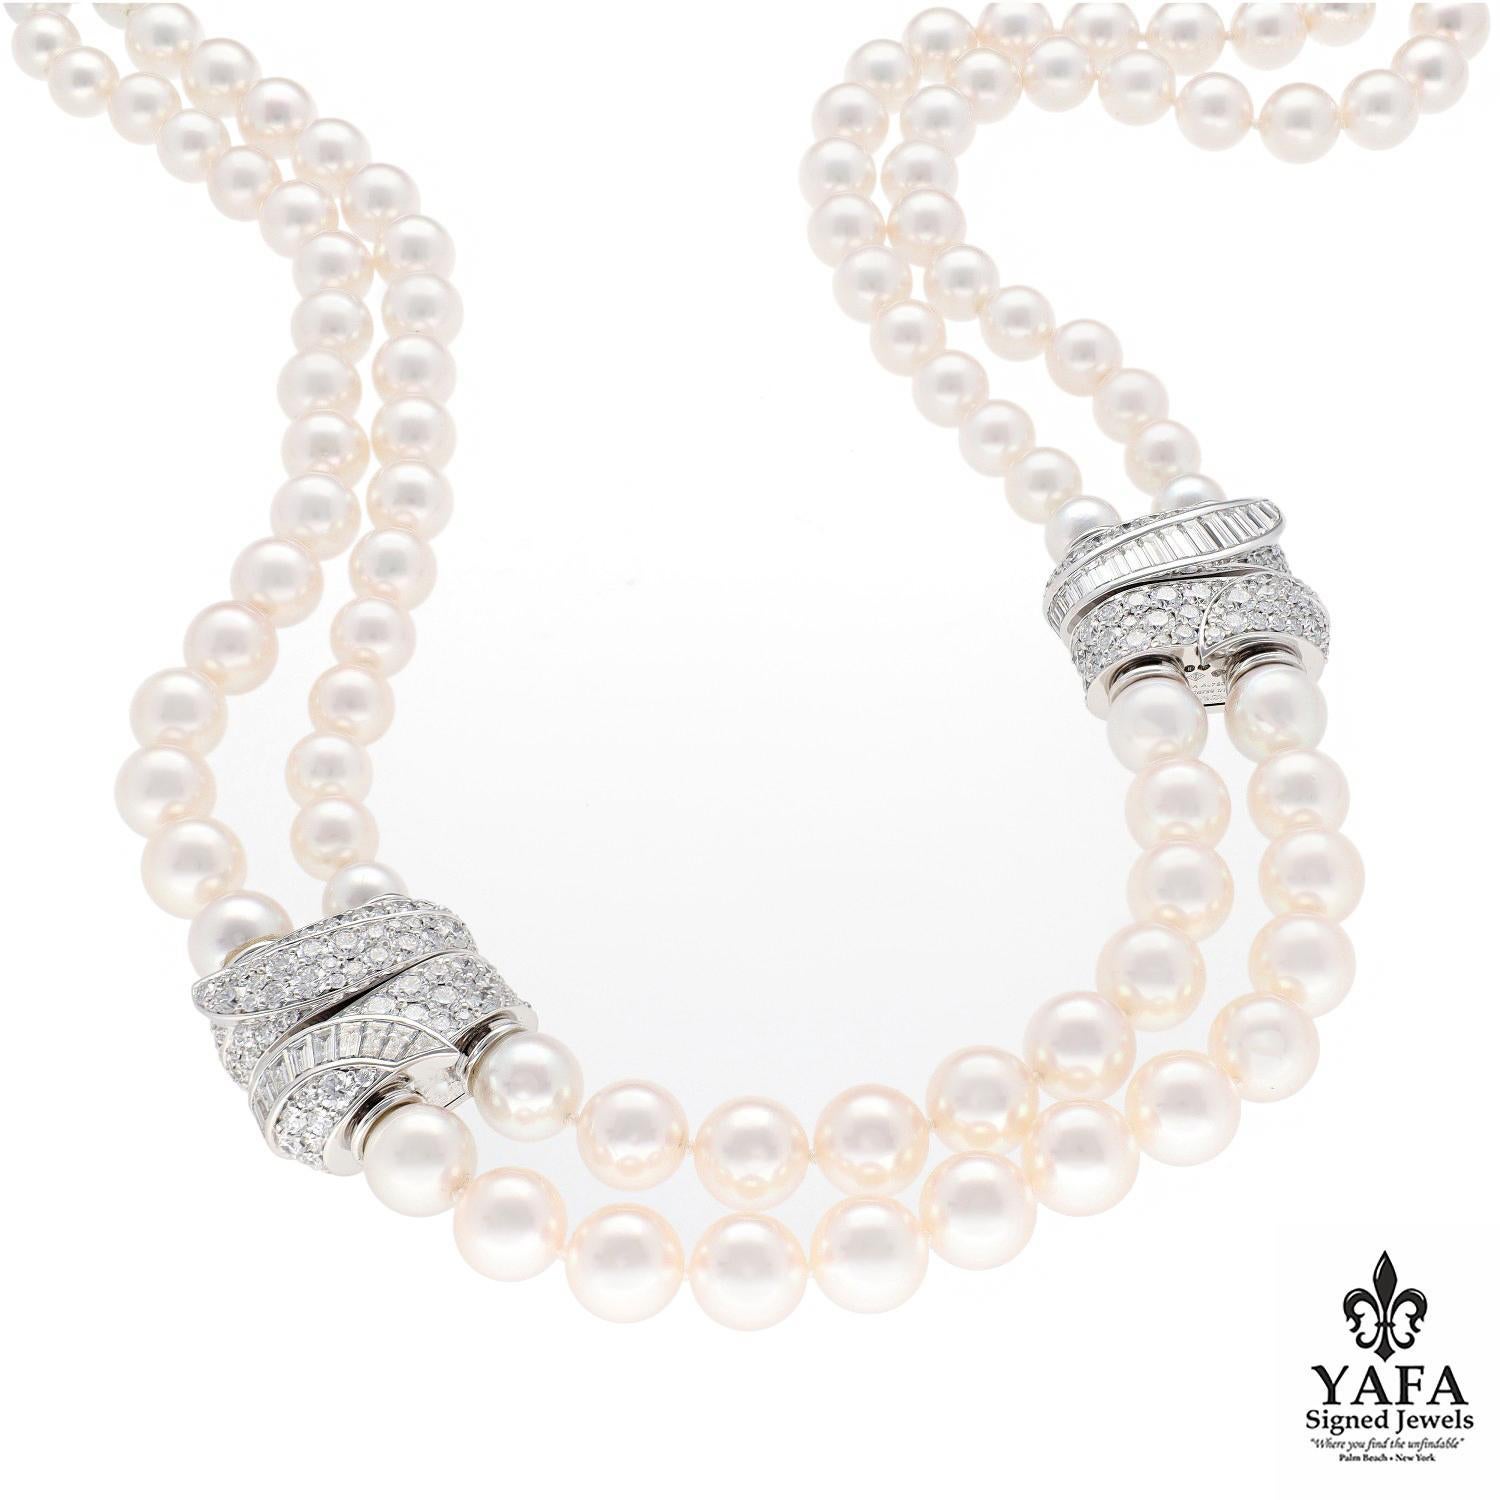 Van Cleef & Arpels 2-Row Pearl and Diamond Necklace with 1- Diamond Barrel Clasp and 2- Extra Diamond Barrel Clasps.
In 1956, American Actress Grace Kelly Married Prince Rainier III, Thus Becoming Princess of Monaco. To Celebrate Their Union, the